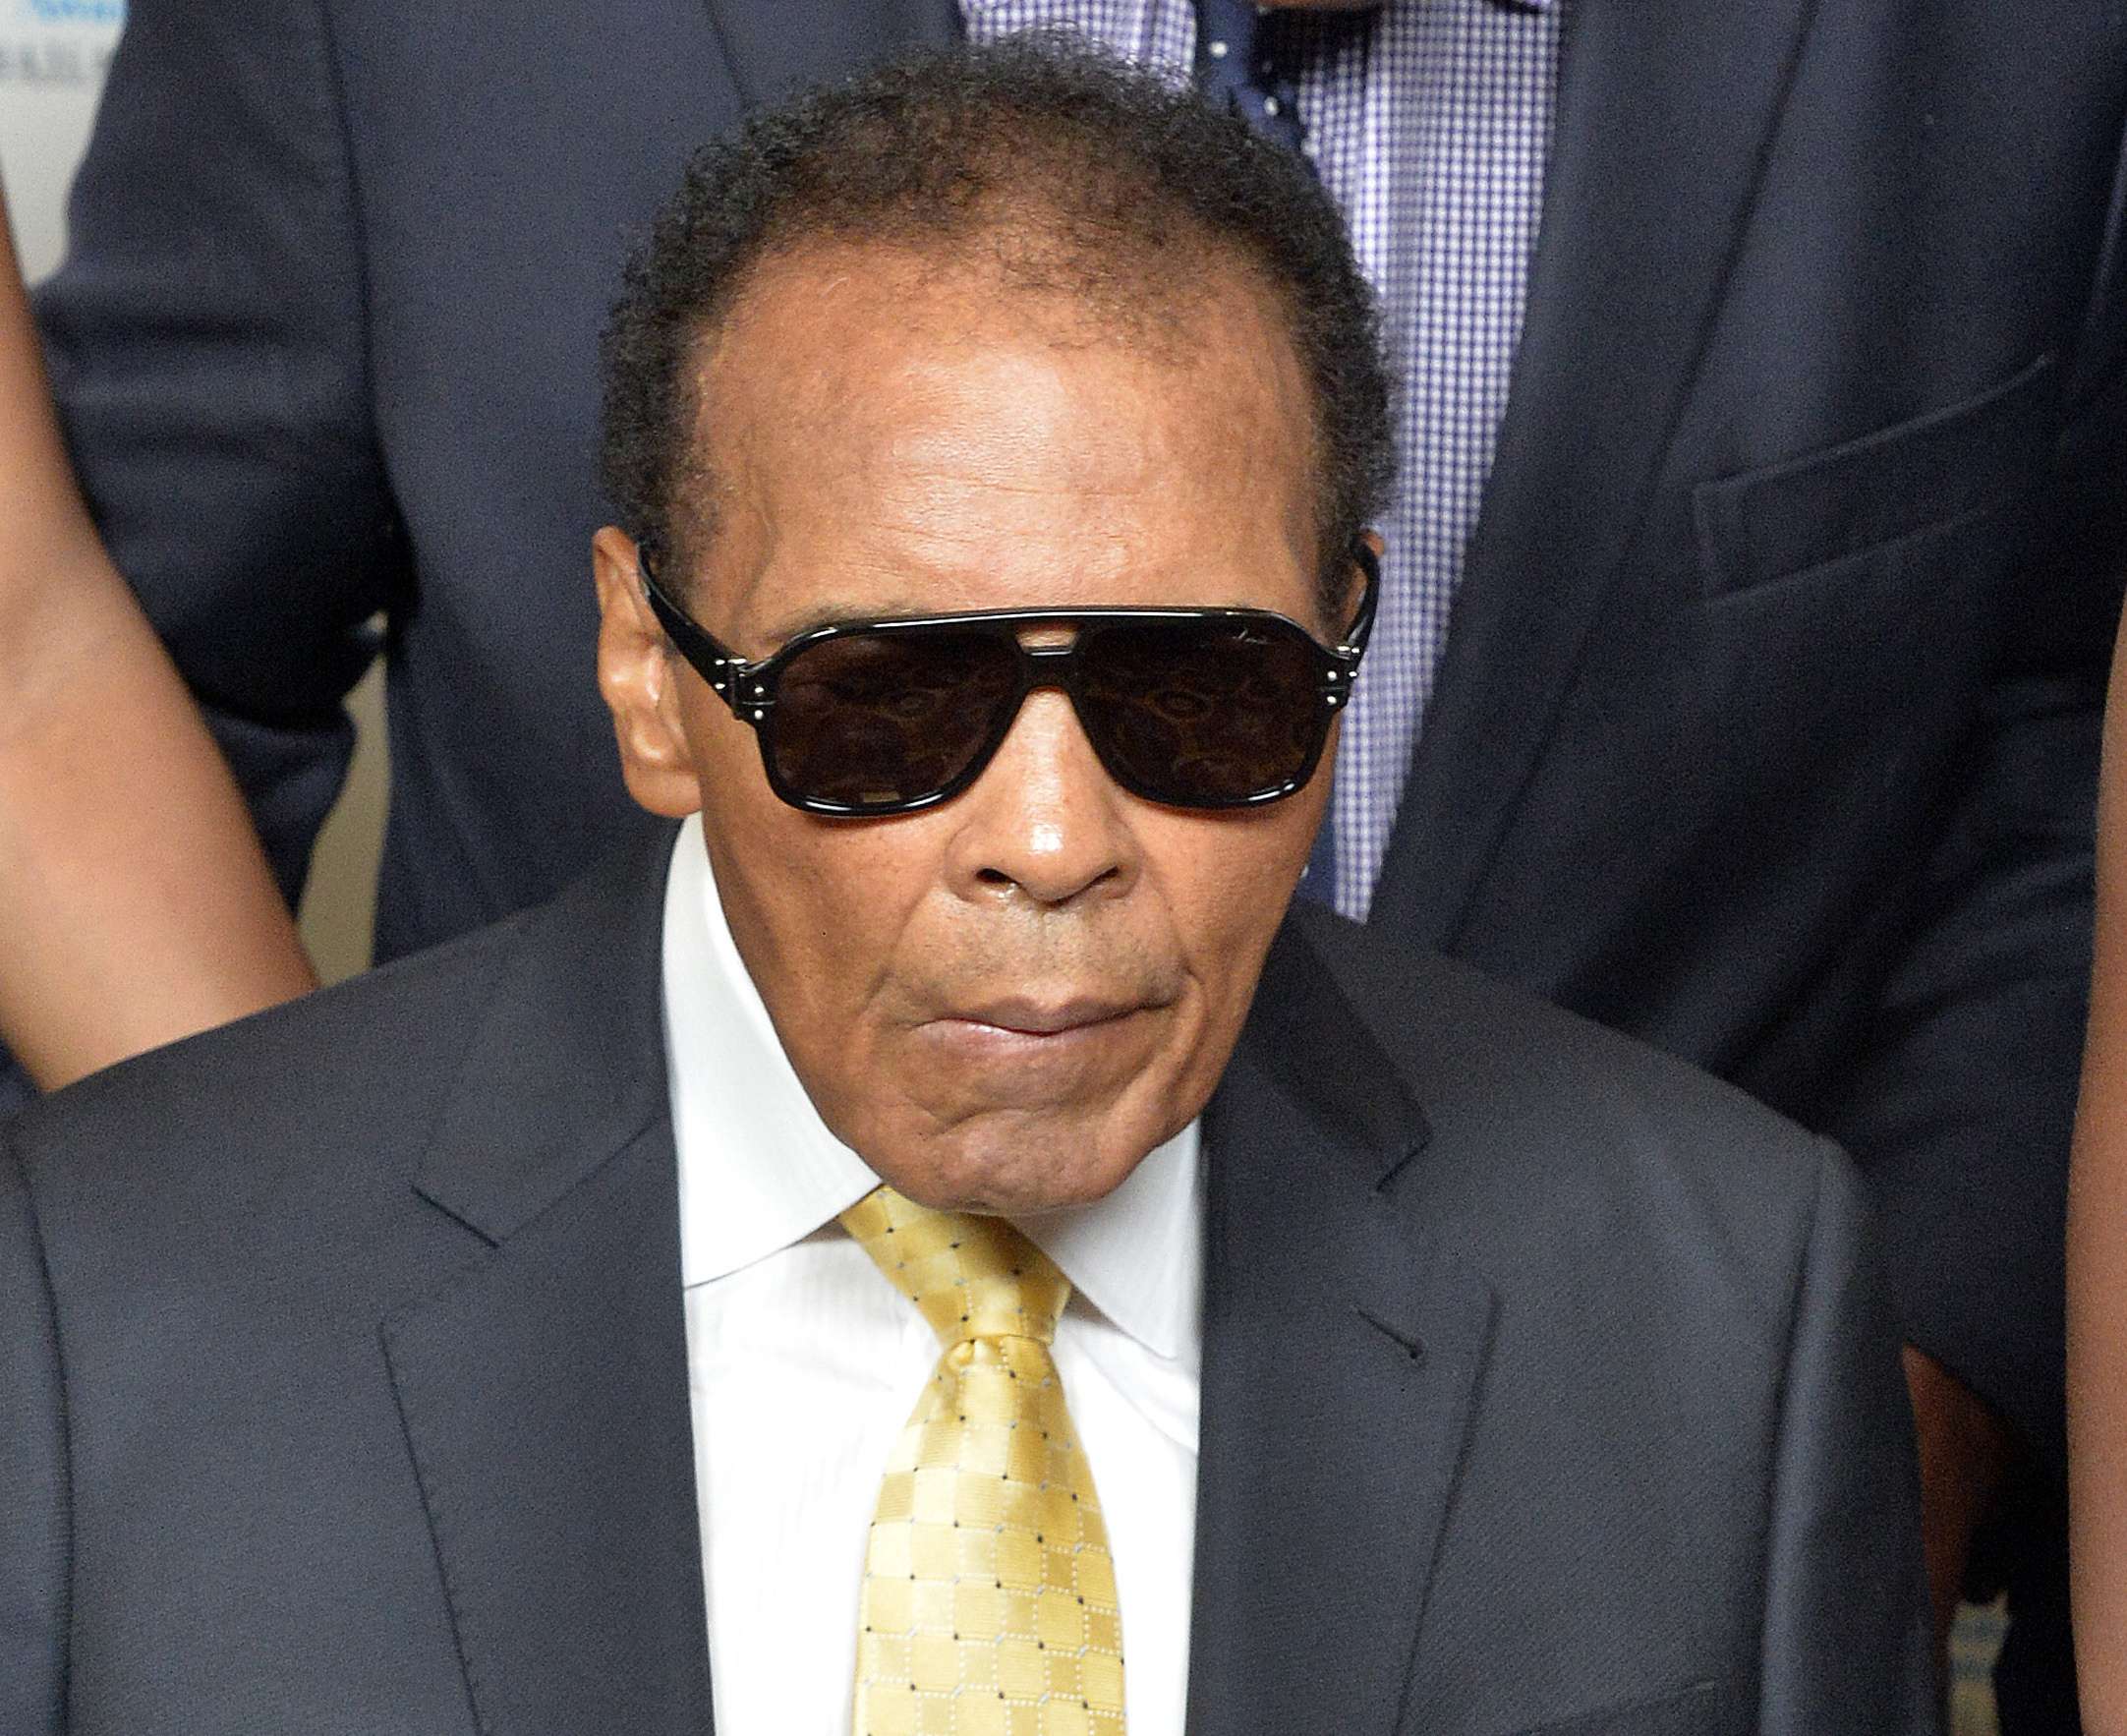 Boxing legend Muhammad Ali suffers from Parkinson’s disease. Photo: AP